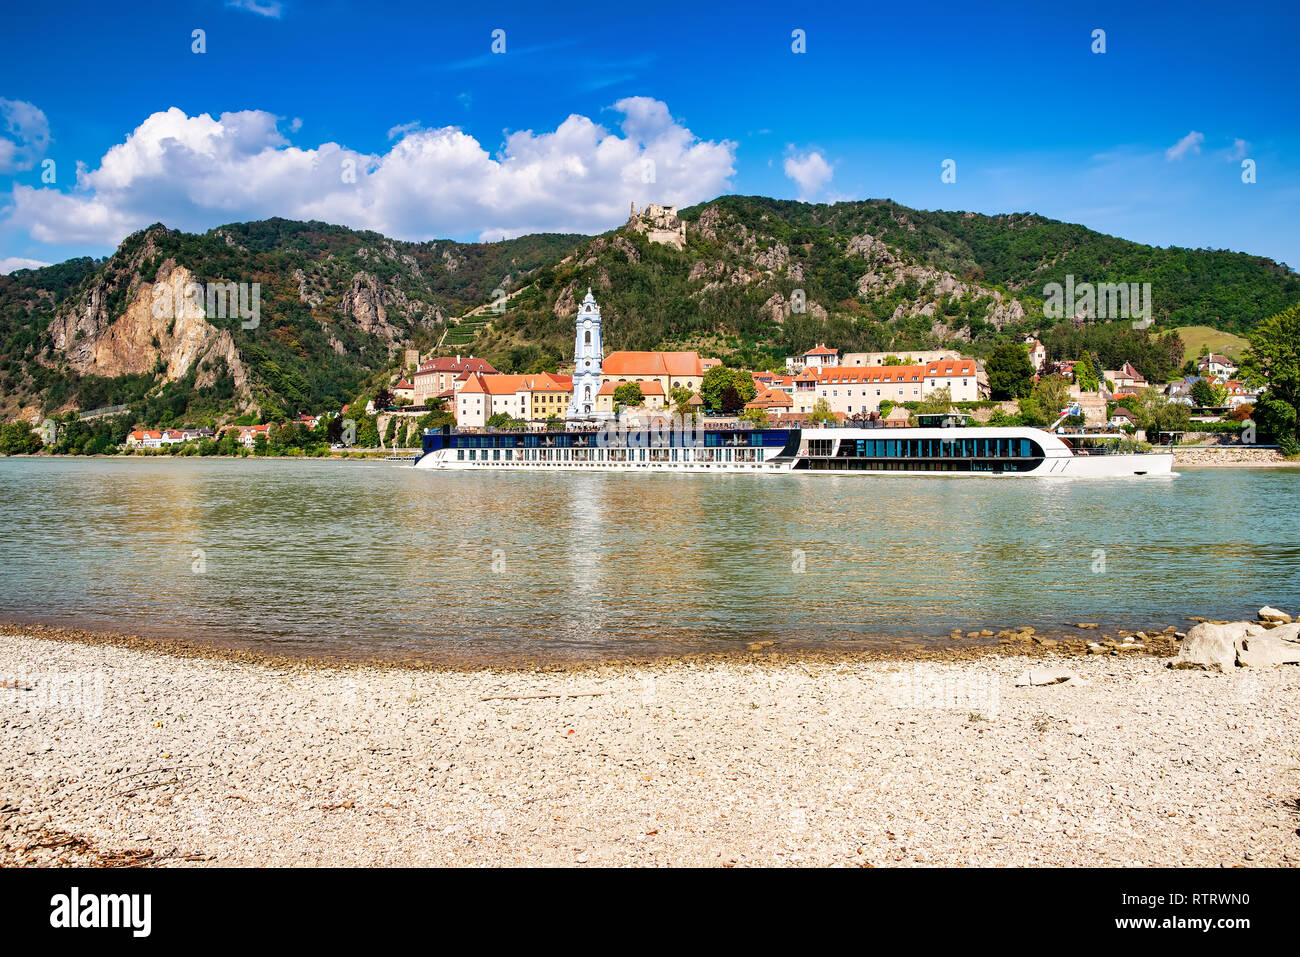 DÜRNSTEIN, AUSTRIA -09/10/2018: The medieval town of Durnstein along the Danube River in the picturesque Wachau Valley, a UNESCO World Heritage Site, Stock Photo